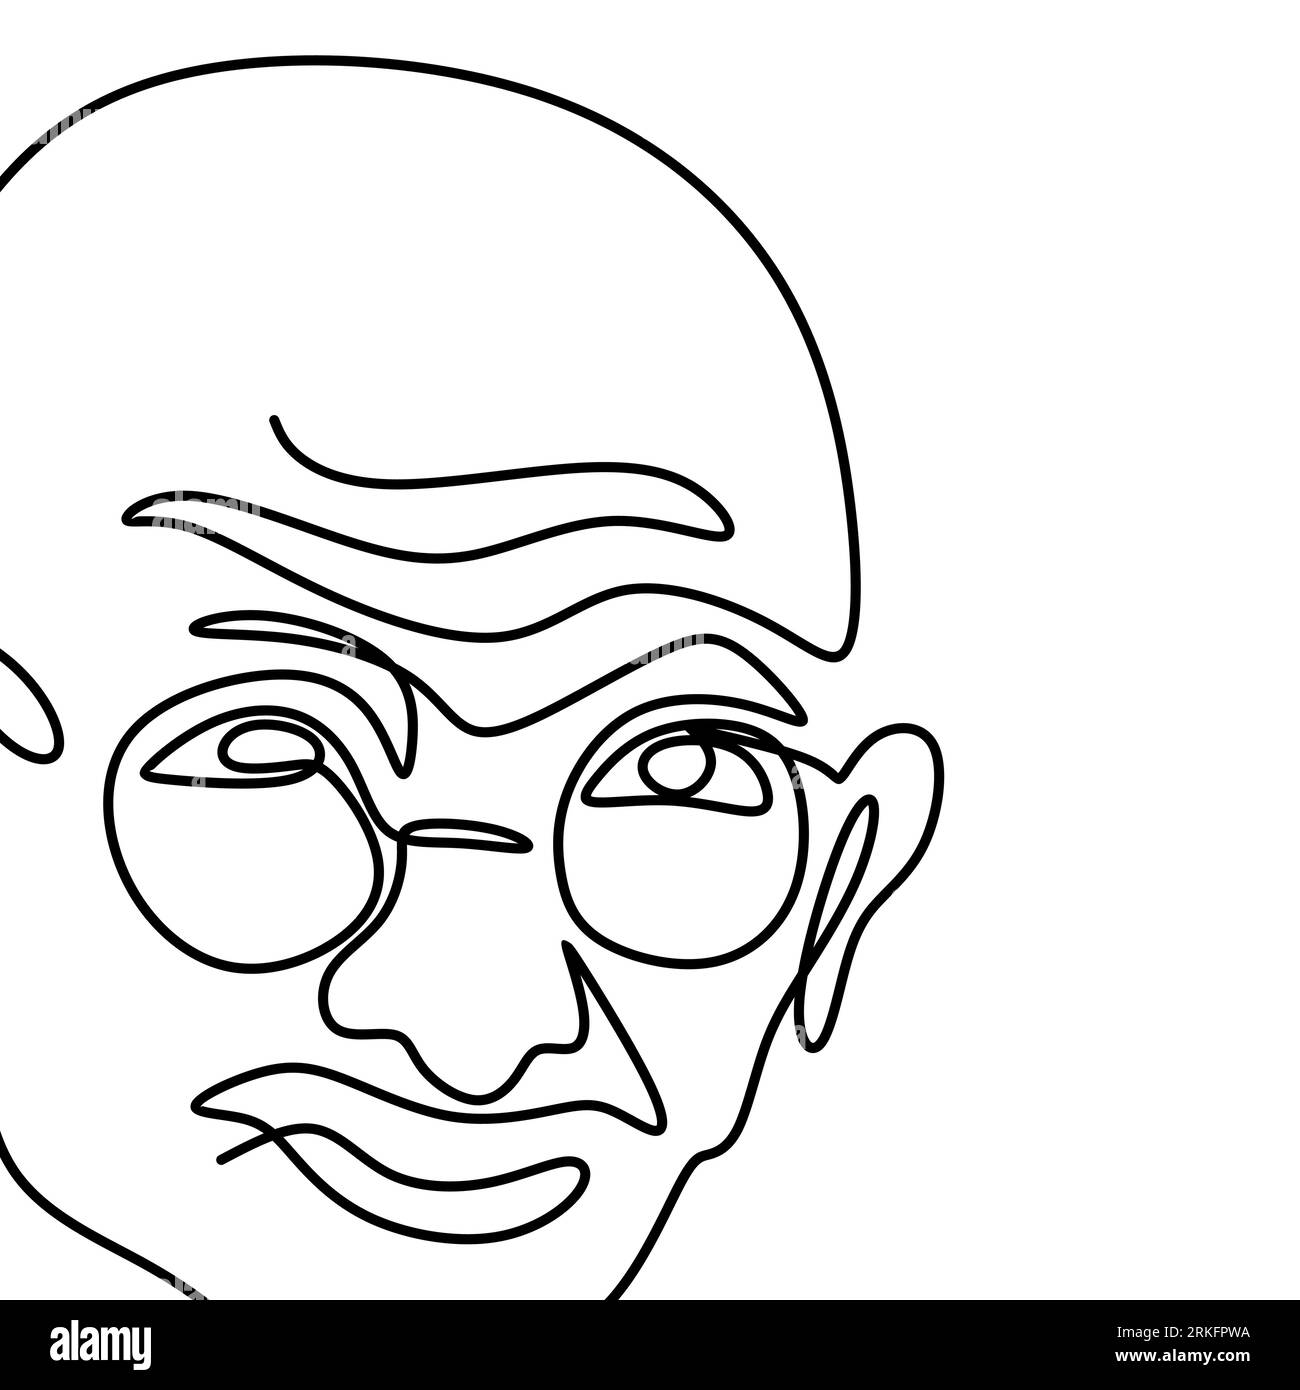 one continuous line drawing of mahatma gandhi an indian figure who was the leader of the indian independence isolated on white background india repu 2RKFPWA